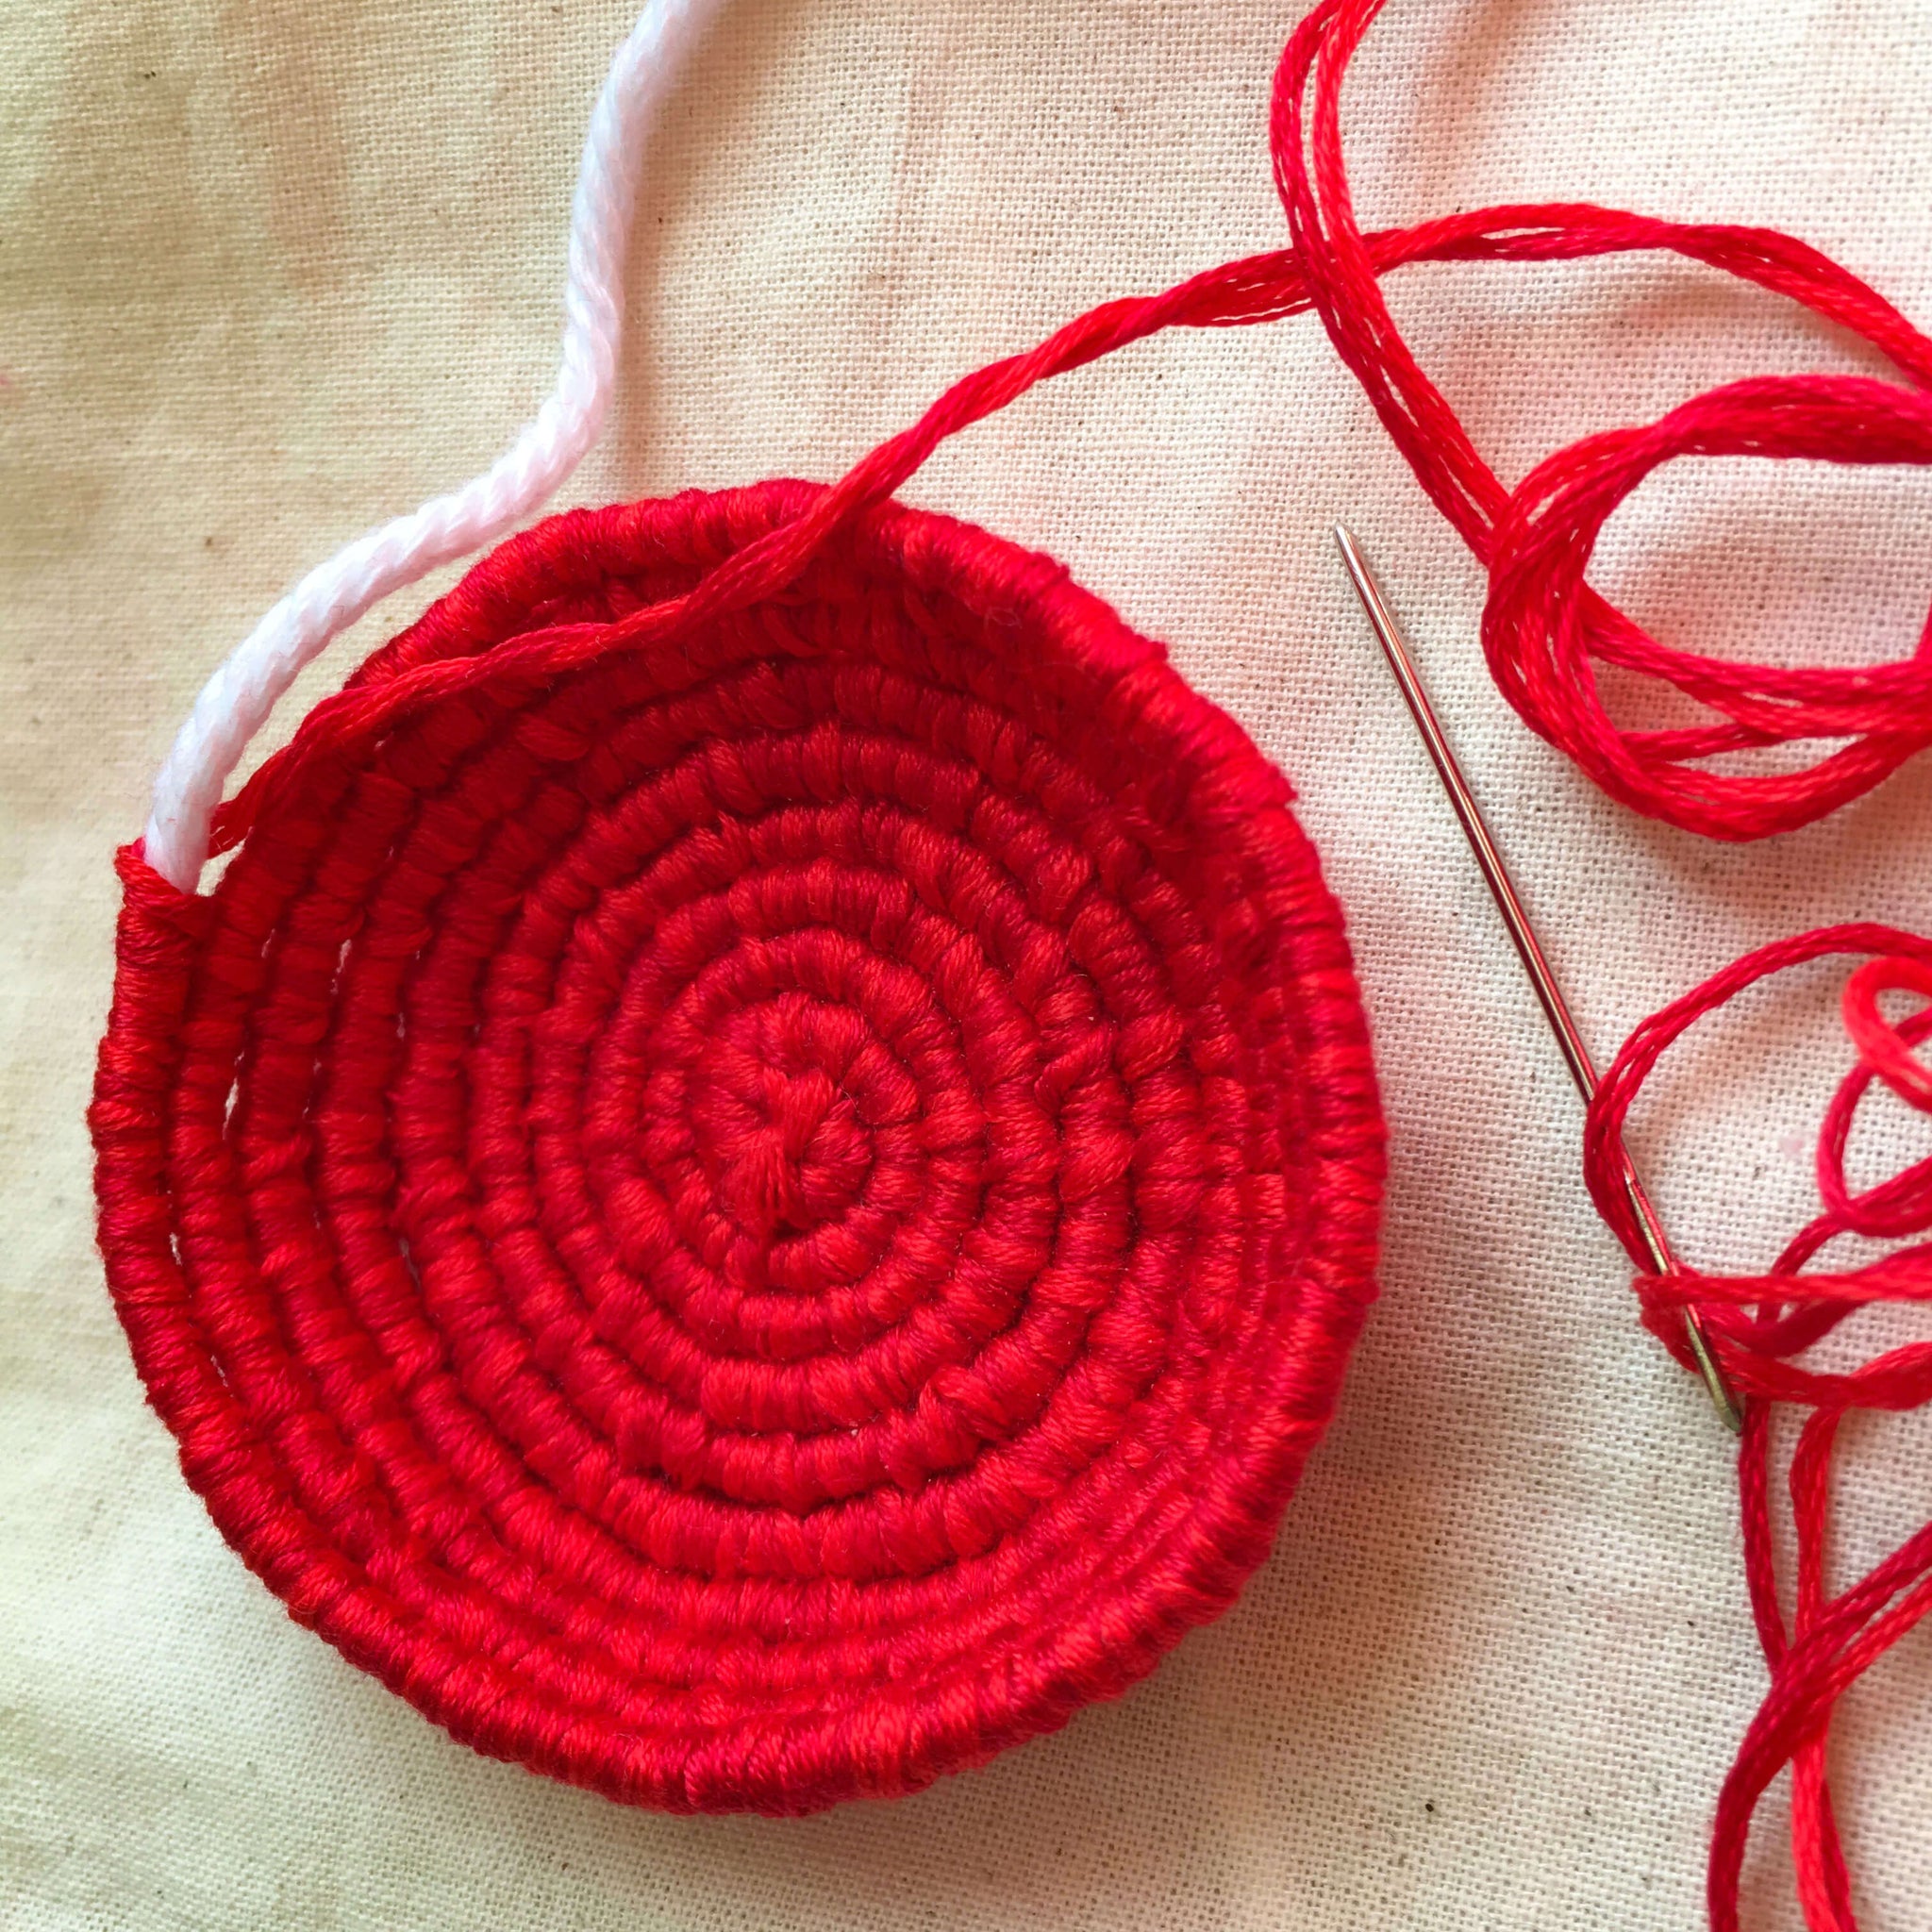 red coiled mini basket in process